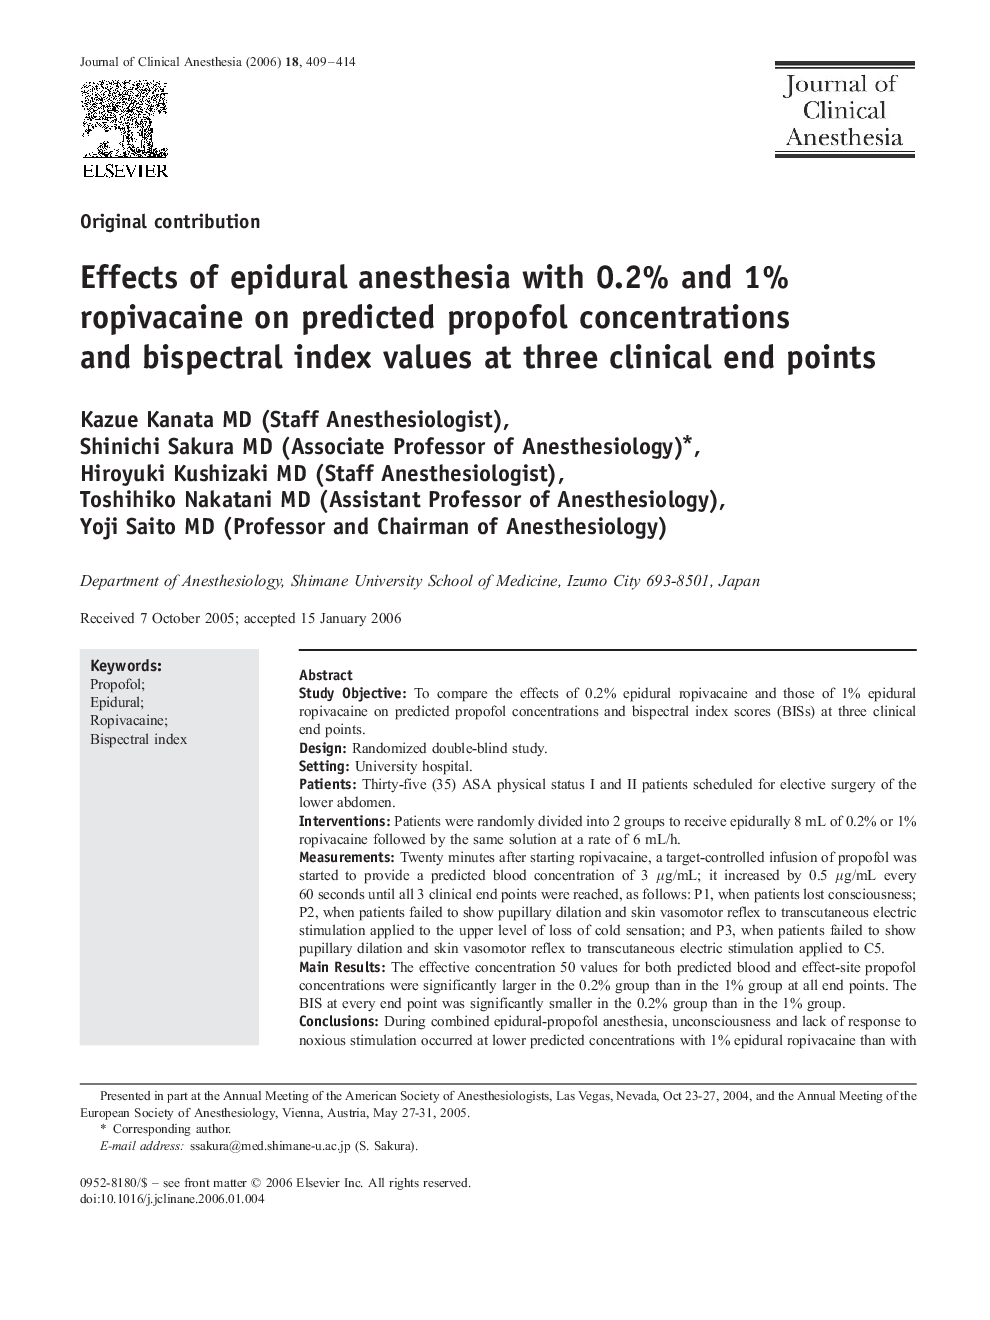 Effects of epidural anesthesia with 0.2% and 1% ropivacaine on predicted propofol concentrations and bispectral index values at three clinical end points 